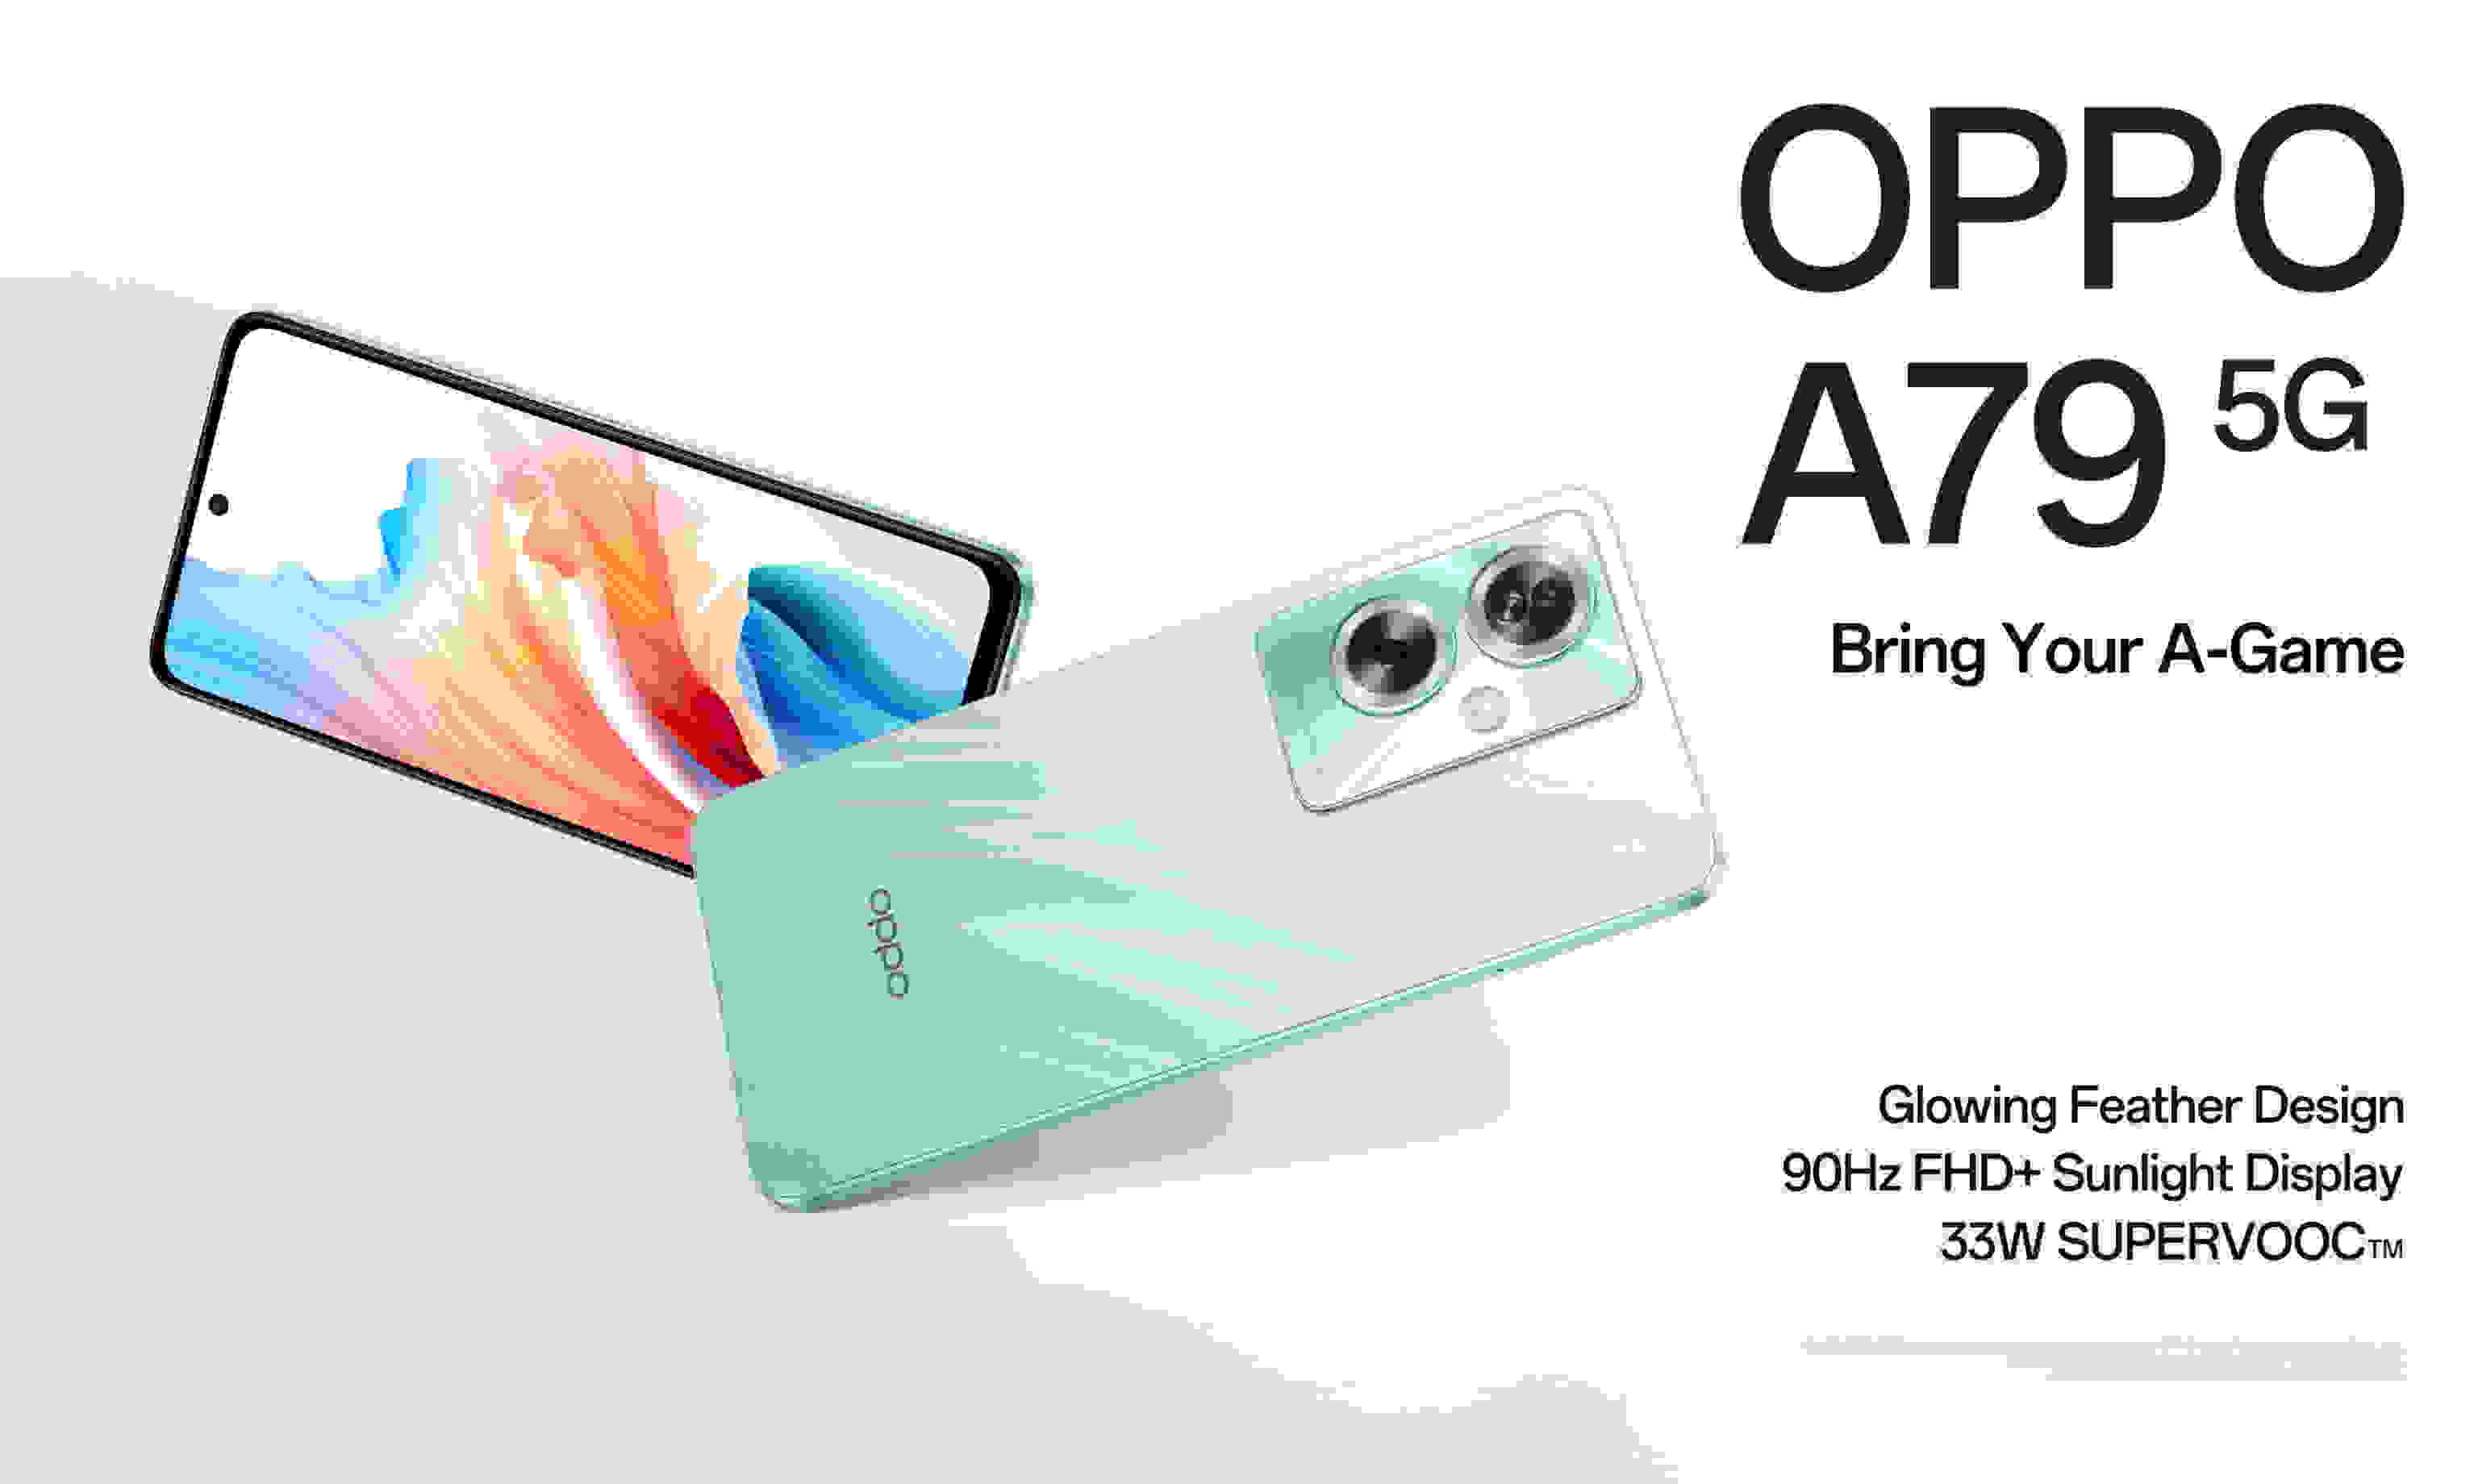 Oppo A79 unveiled in India: Price, Specifications and Availability